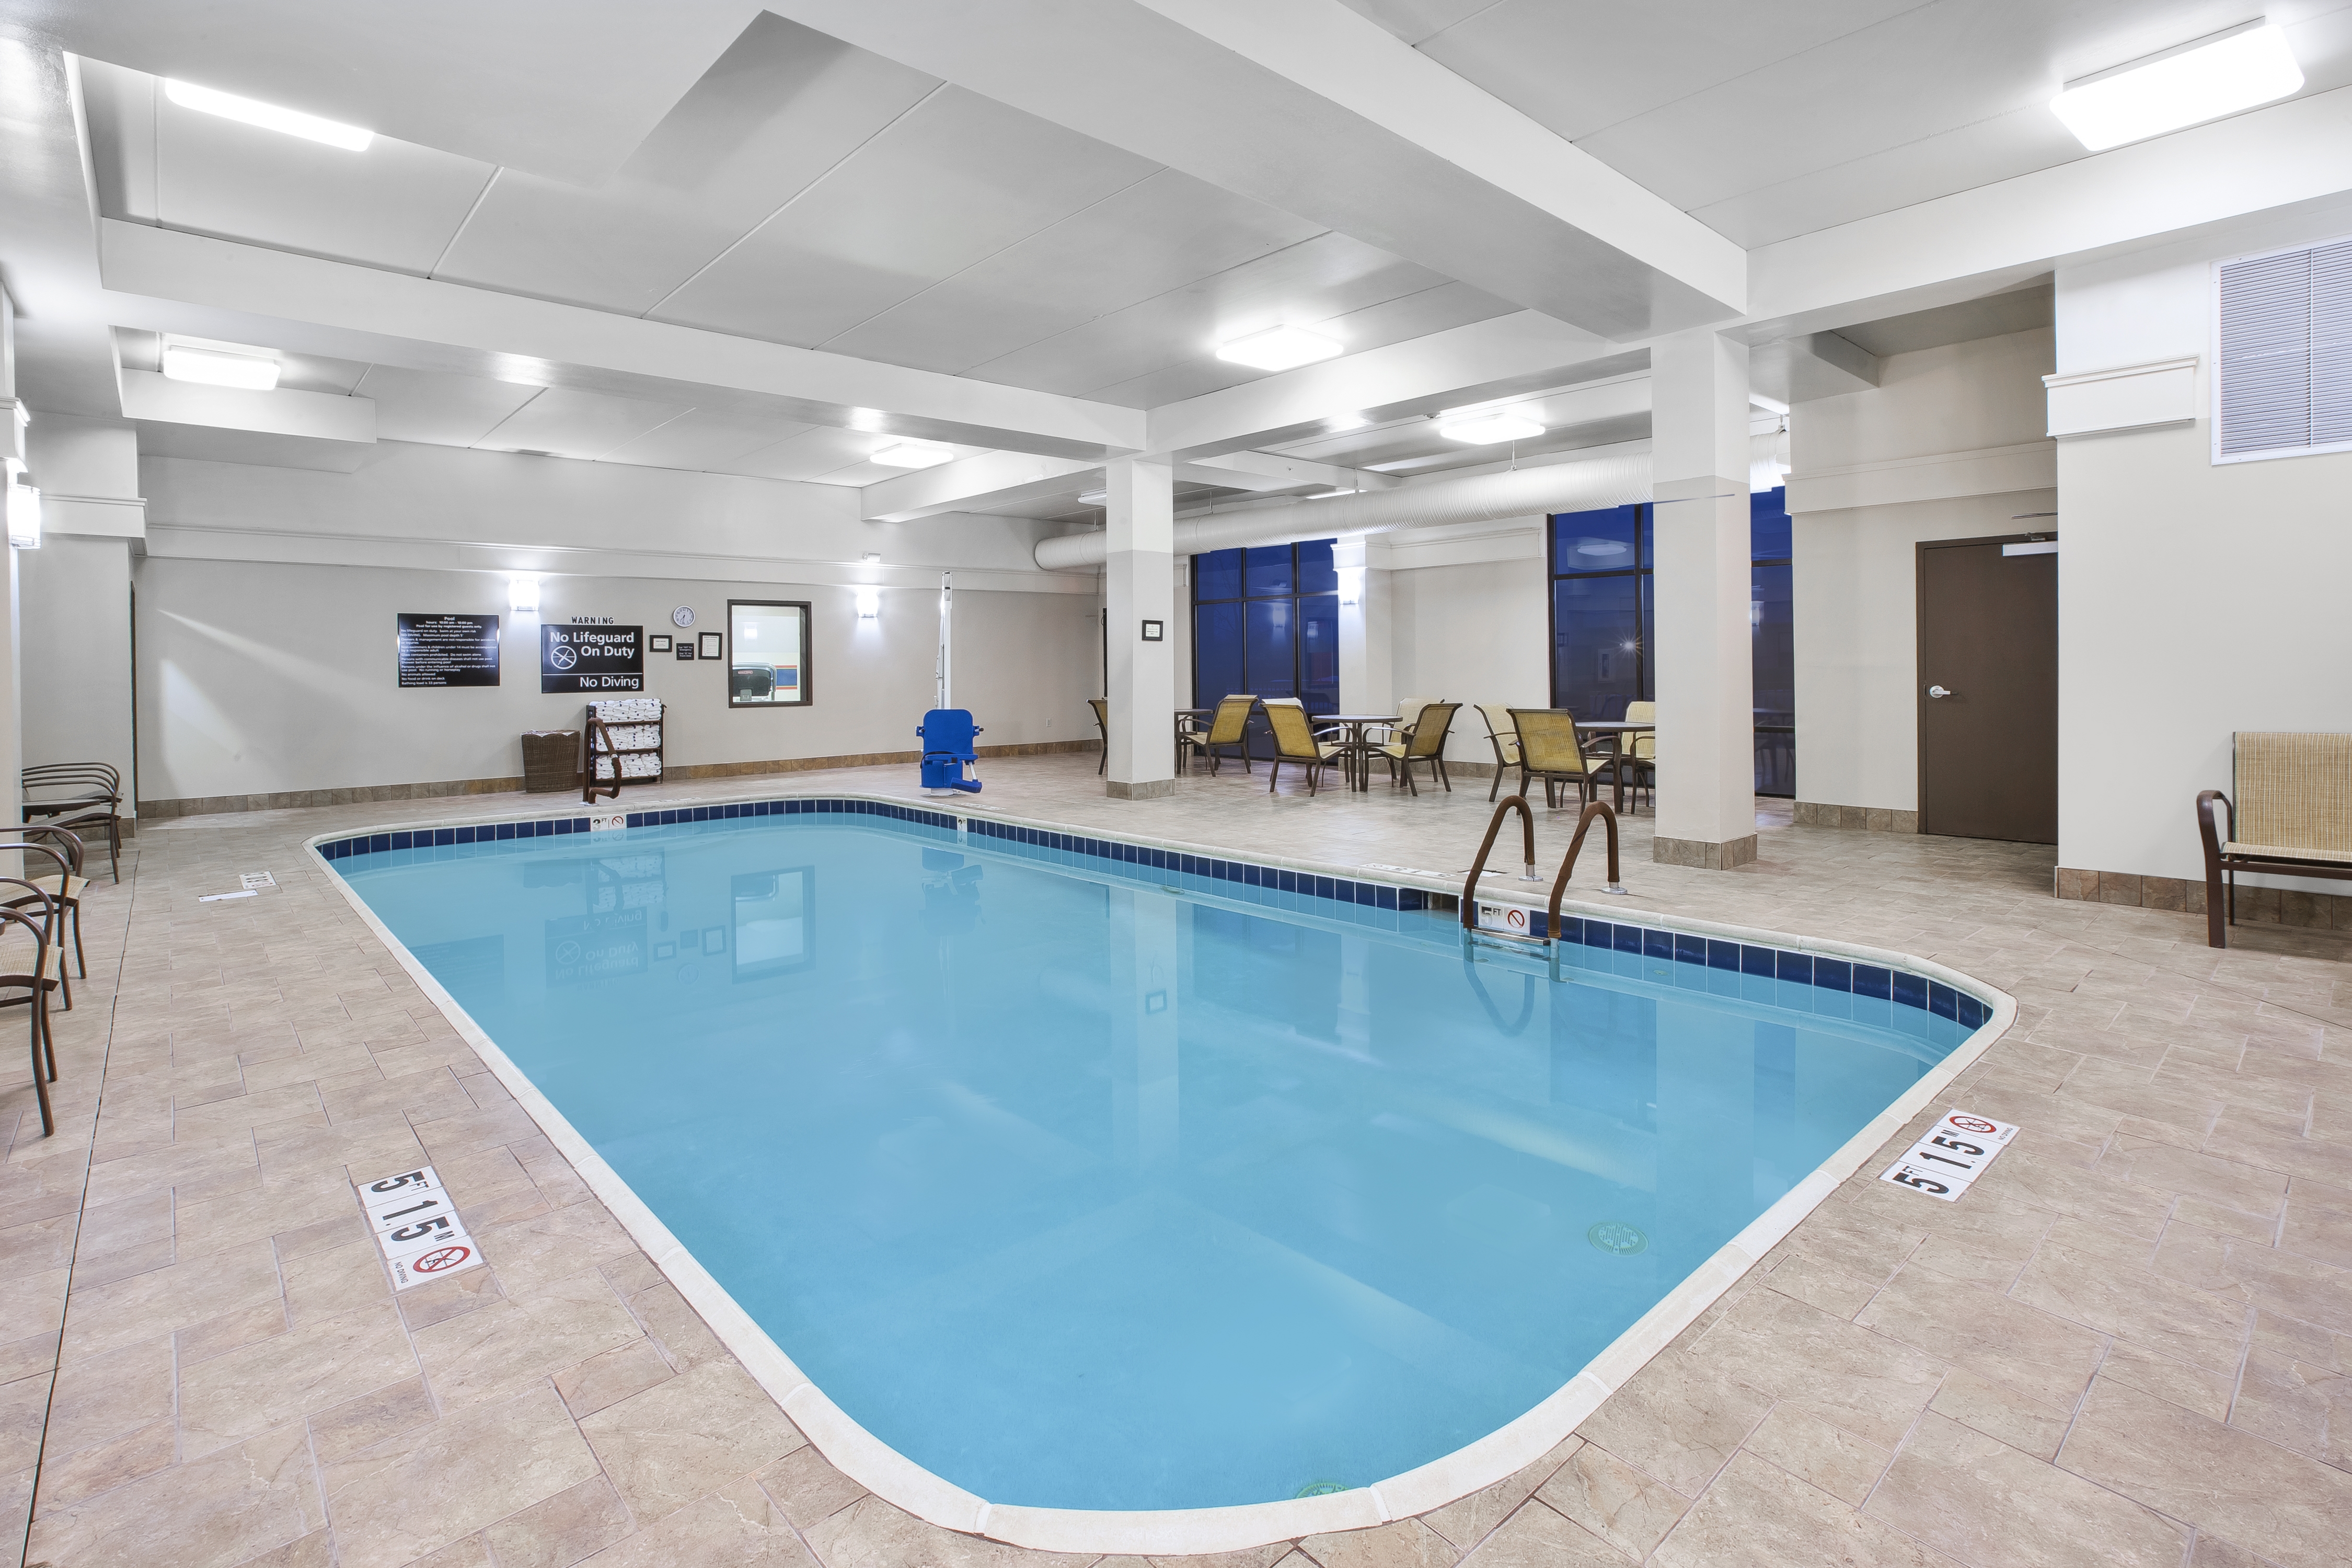 Indoor Pool With Tables and Chairs on Pool Deck